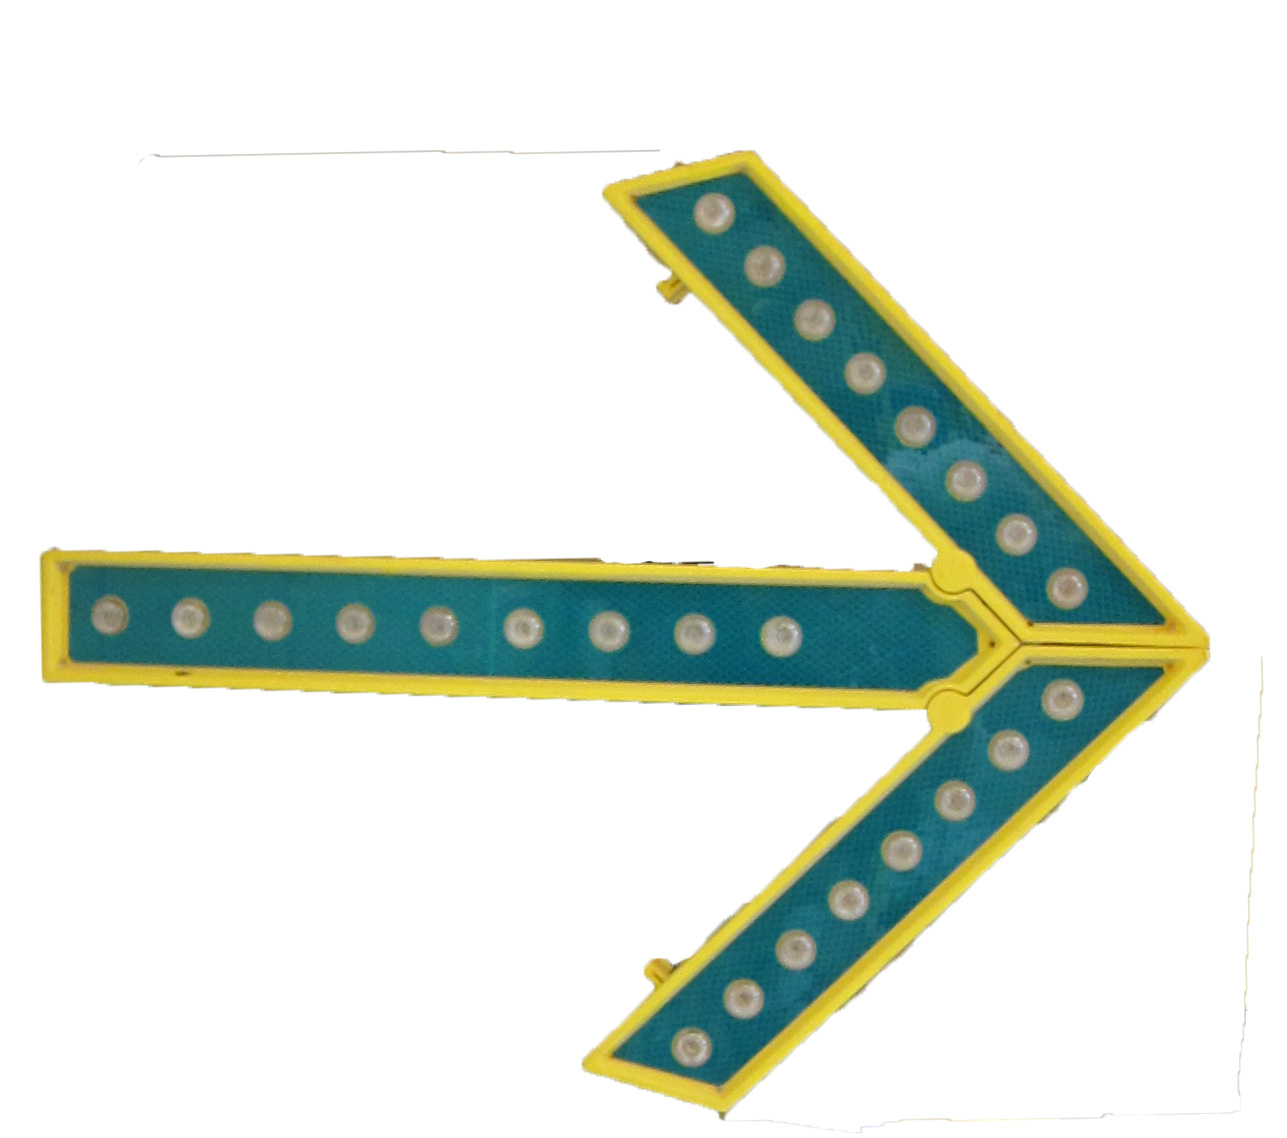 AJT0820 Foldable Arrow Sign (Yellow, Red, Green)